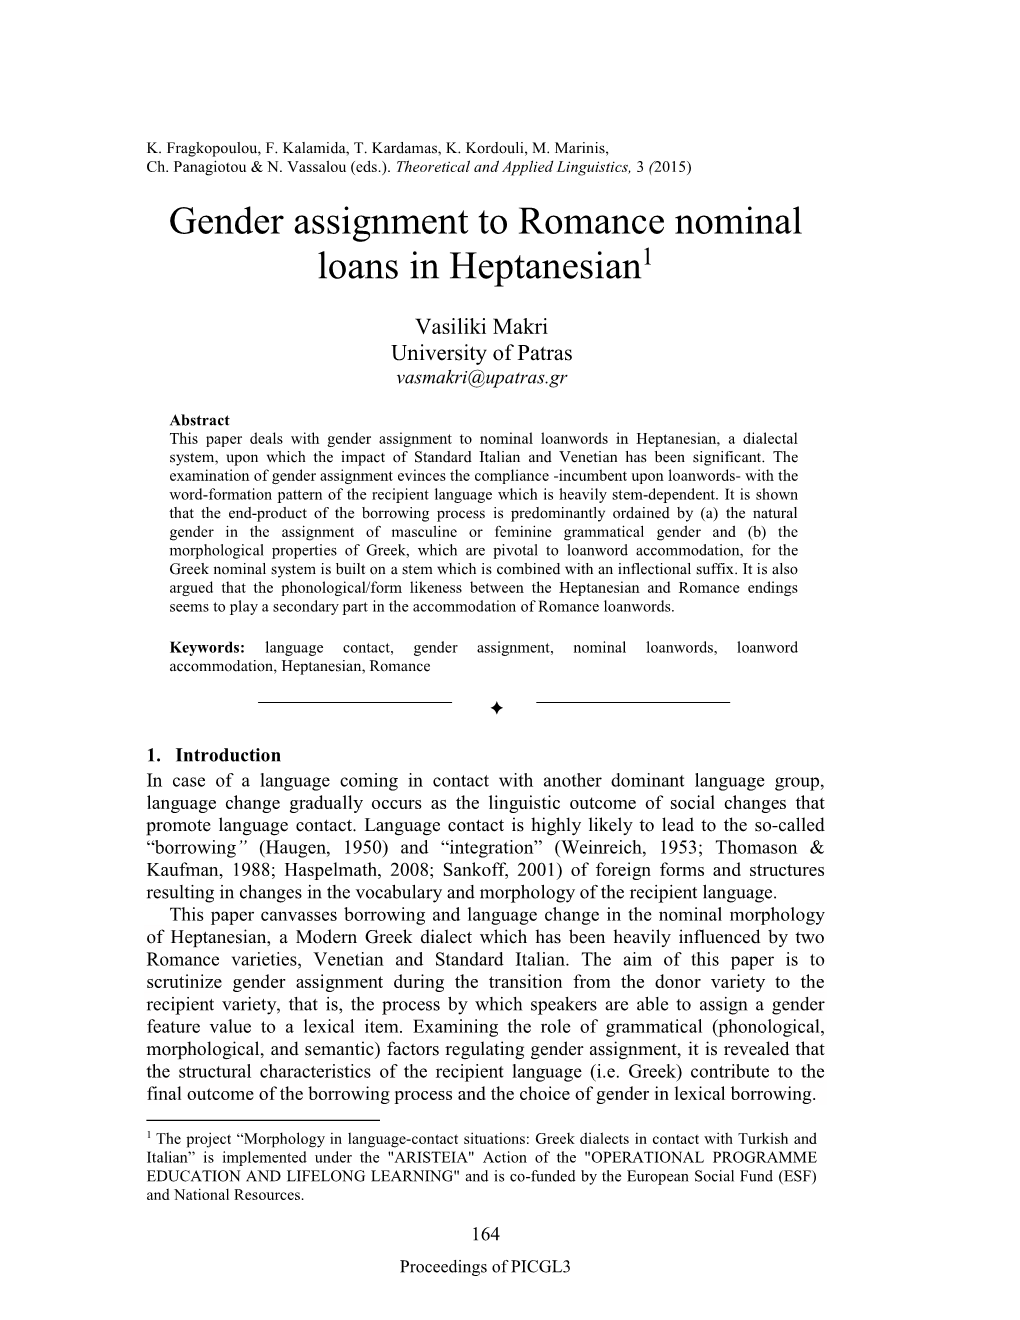 Gender Assignment to Romance Nominal Loans in Heptanesian1